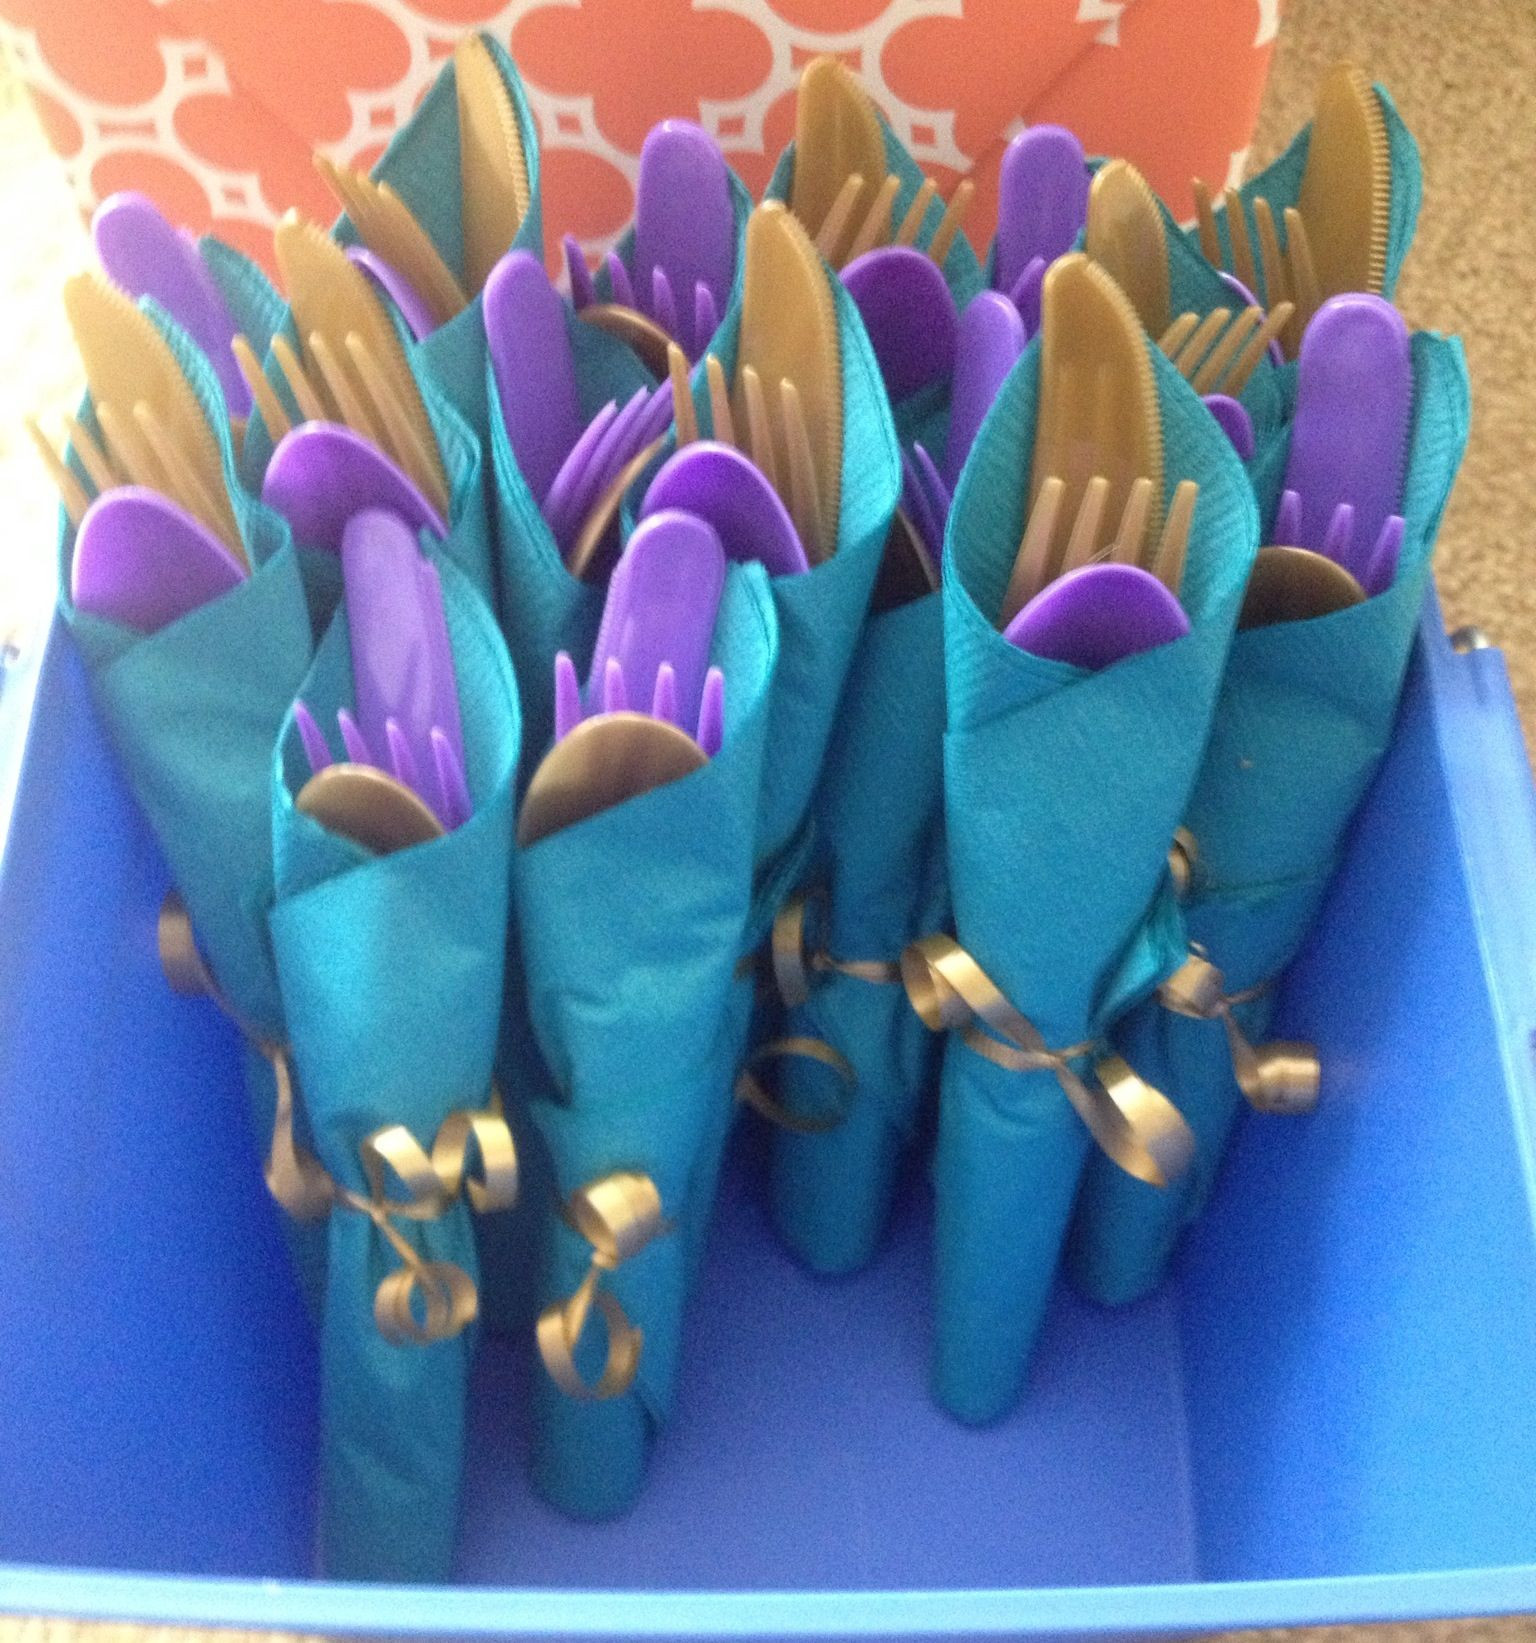 DIY Peacock Party Decorations
 Peacock Party Cutlery Everyone loved these at my